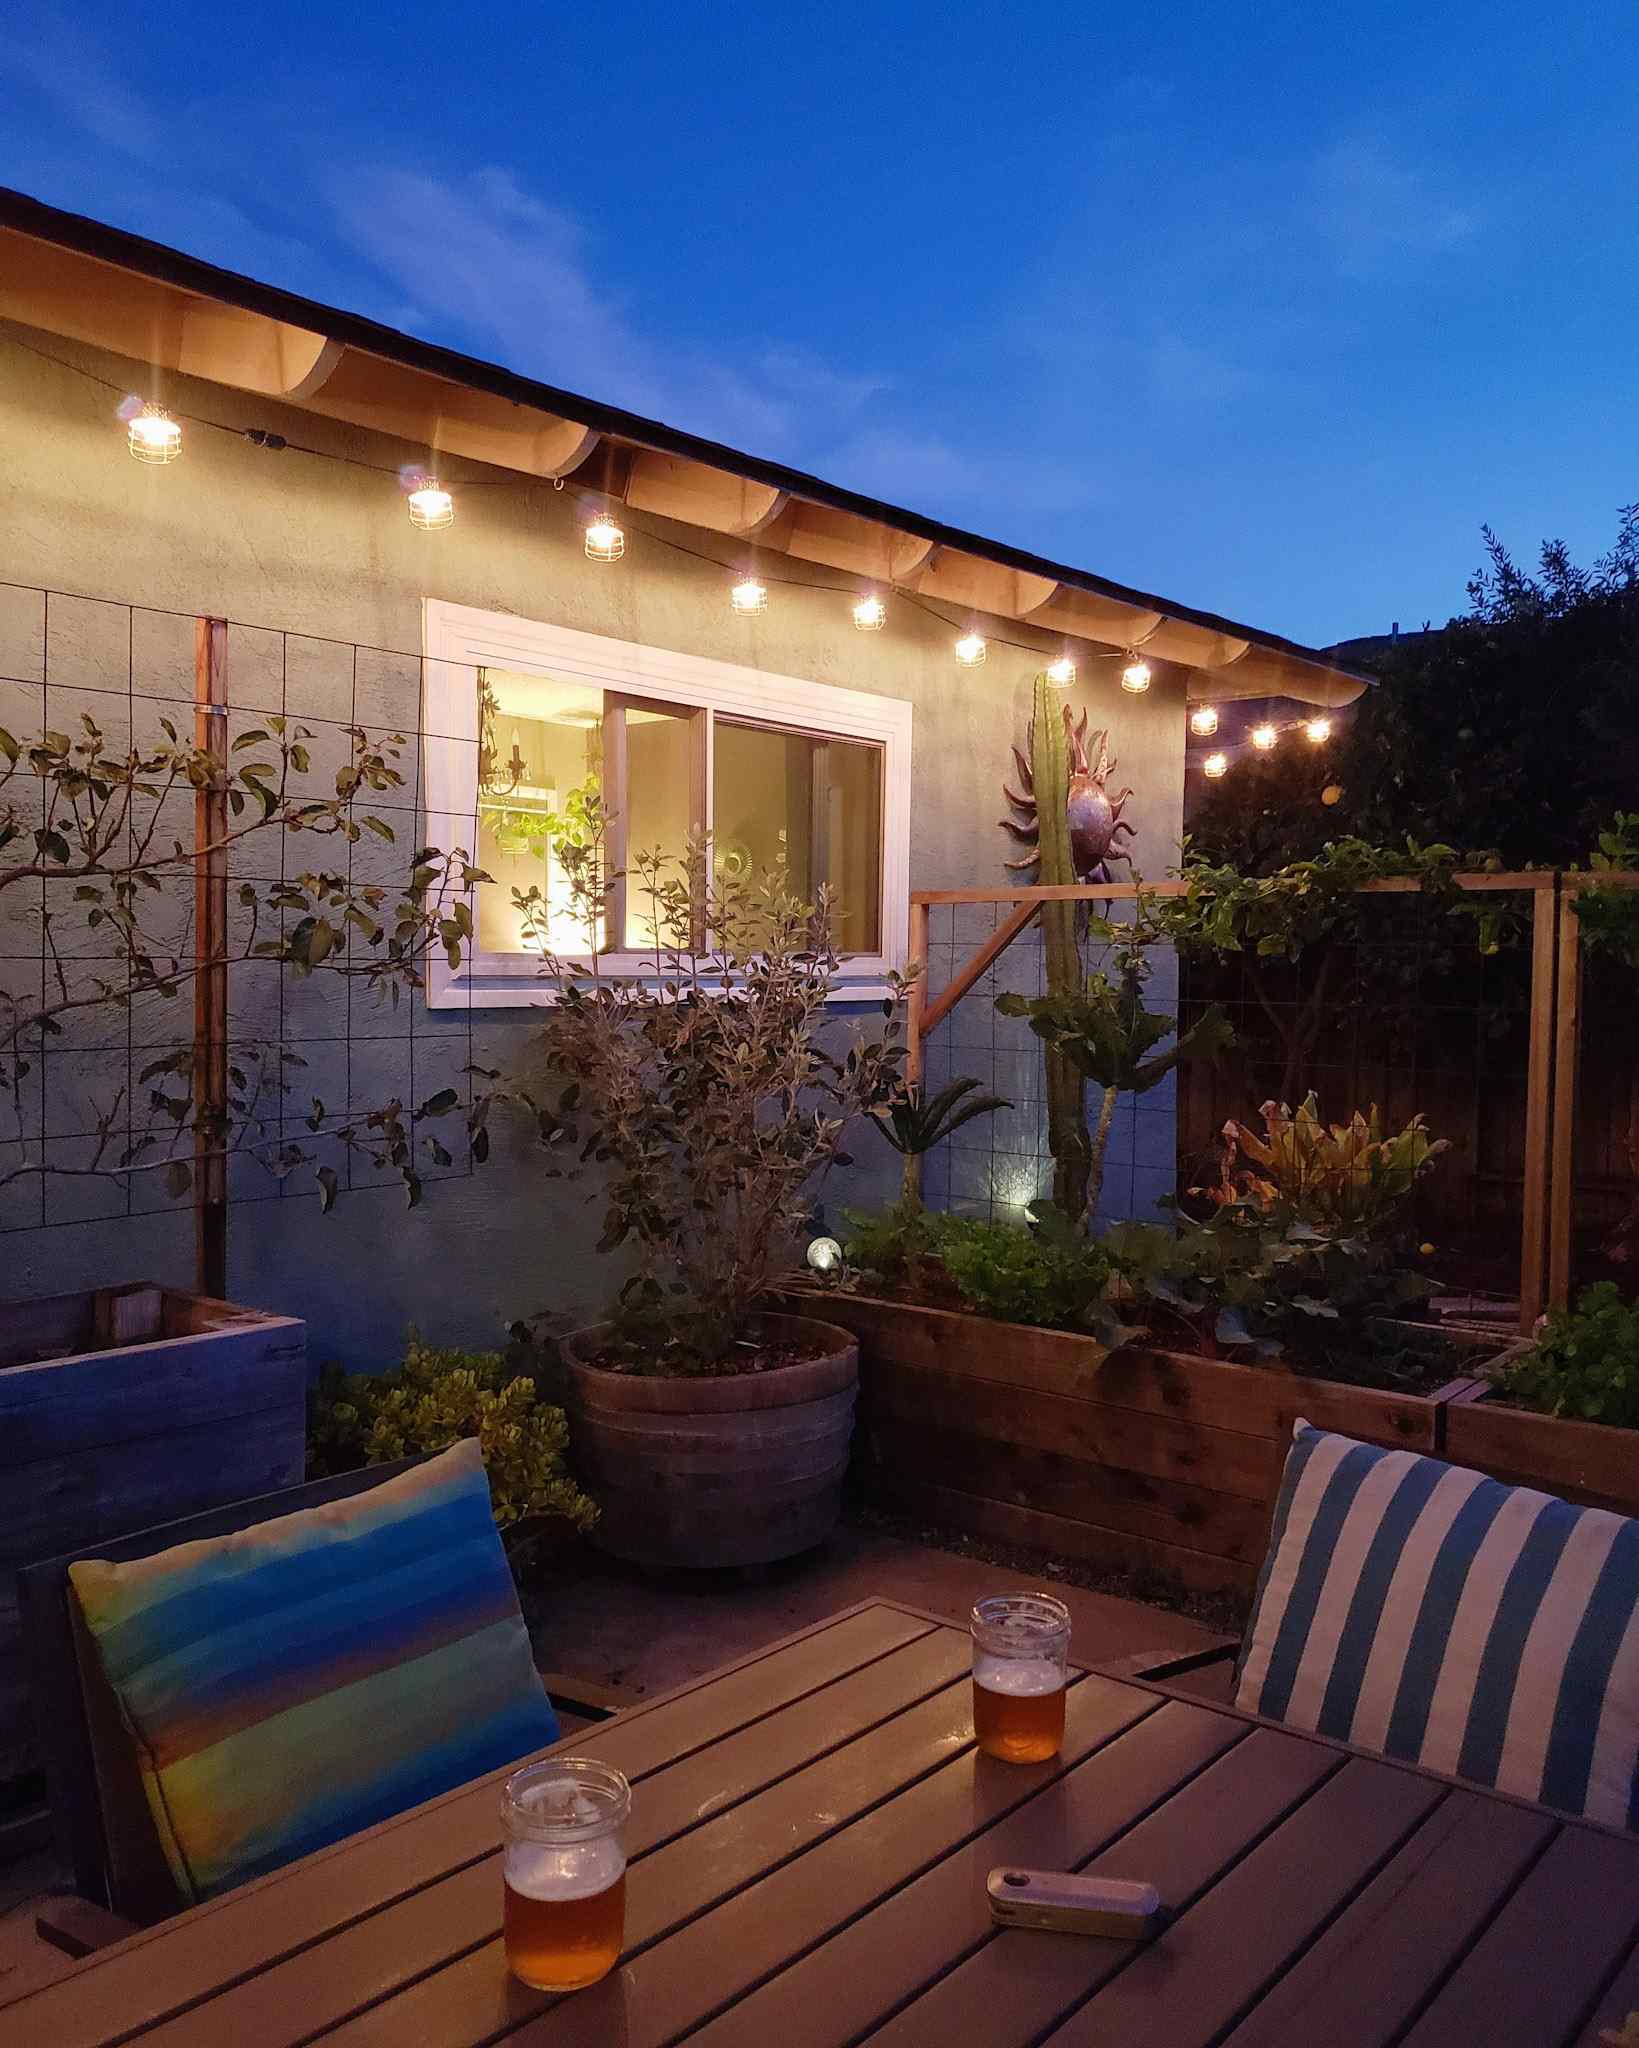 The backyard patio is shown during dusk. There are two beers on the patio table and the string lights that line the eaves of the house are lit. When one starts a homestead, it is a good idea to take time for yourself and relax on occasion. 